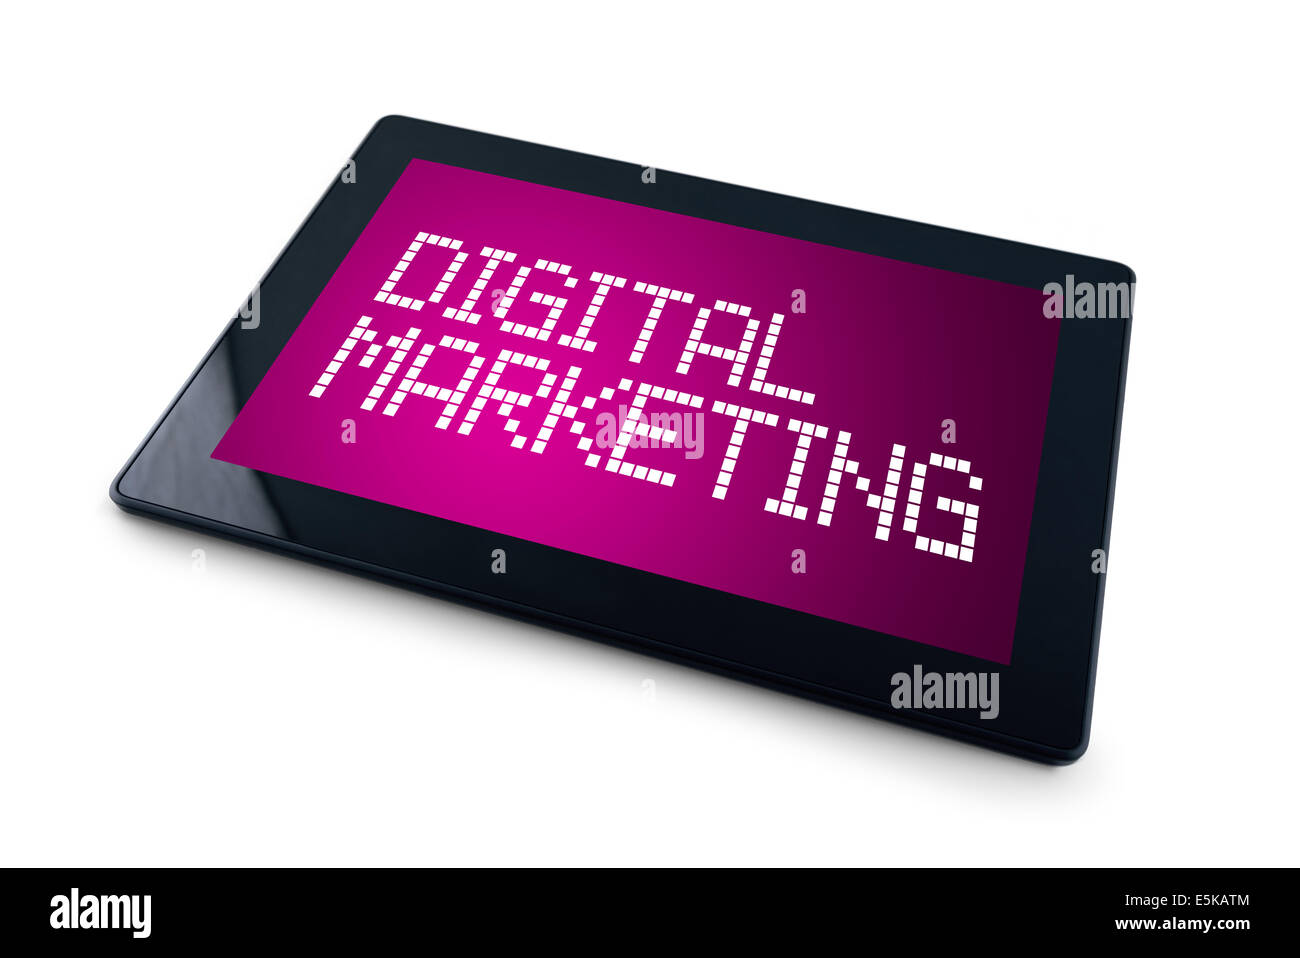 Digital Marketing on Generic Tablet computer display overwhite background. Stock Photo